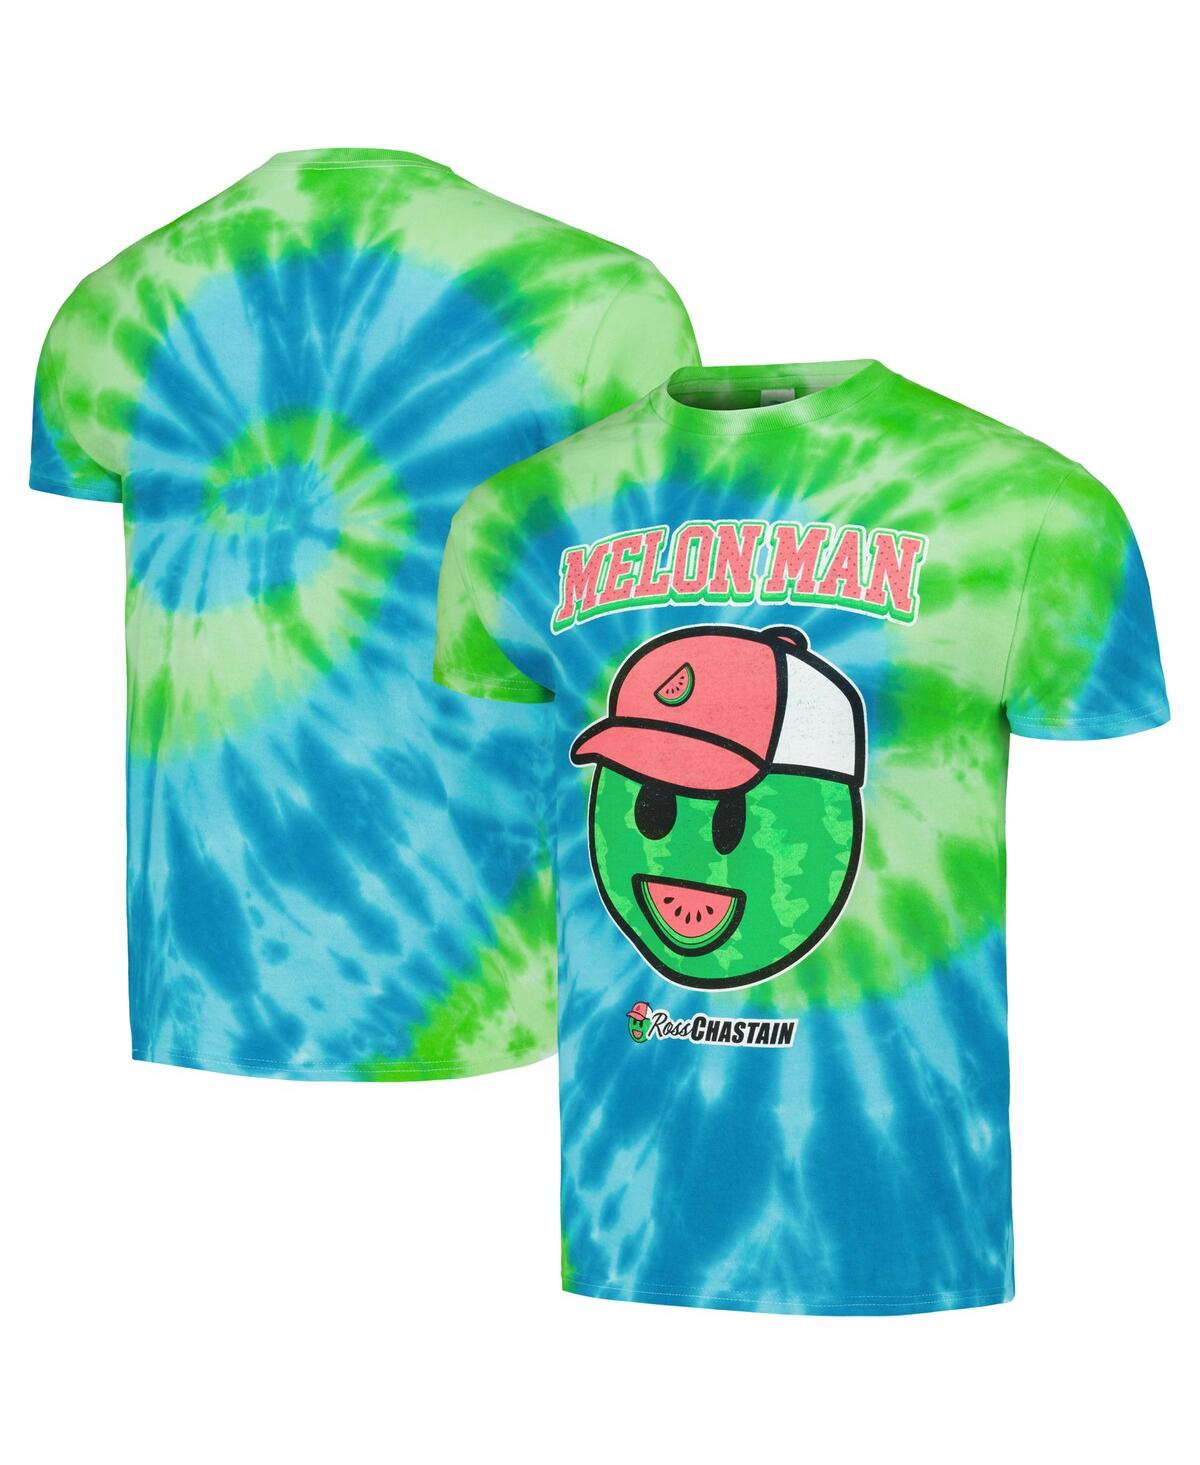 Trackhouse Racing Team Collection Men's  Green, Blue Ross Chastain Melon Man Tie-dyed T-shirt